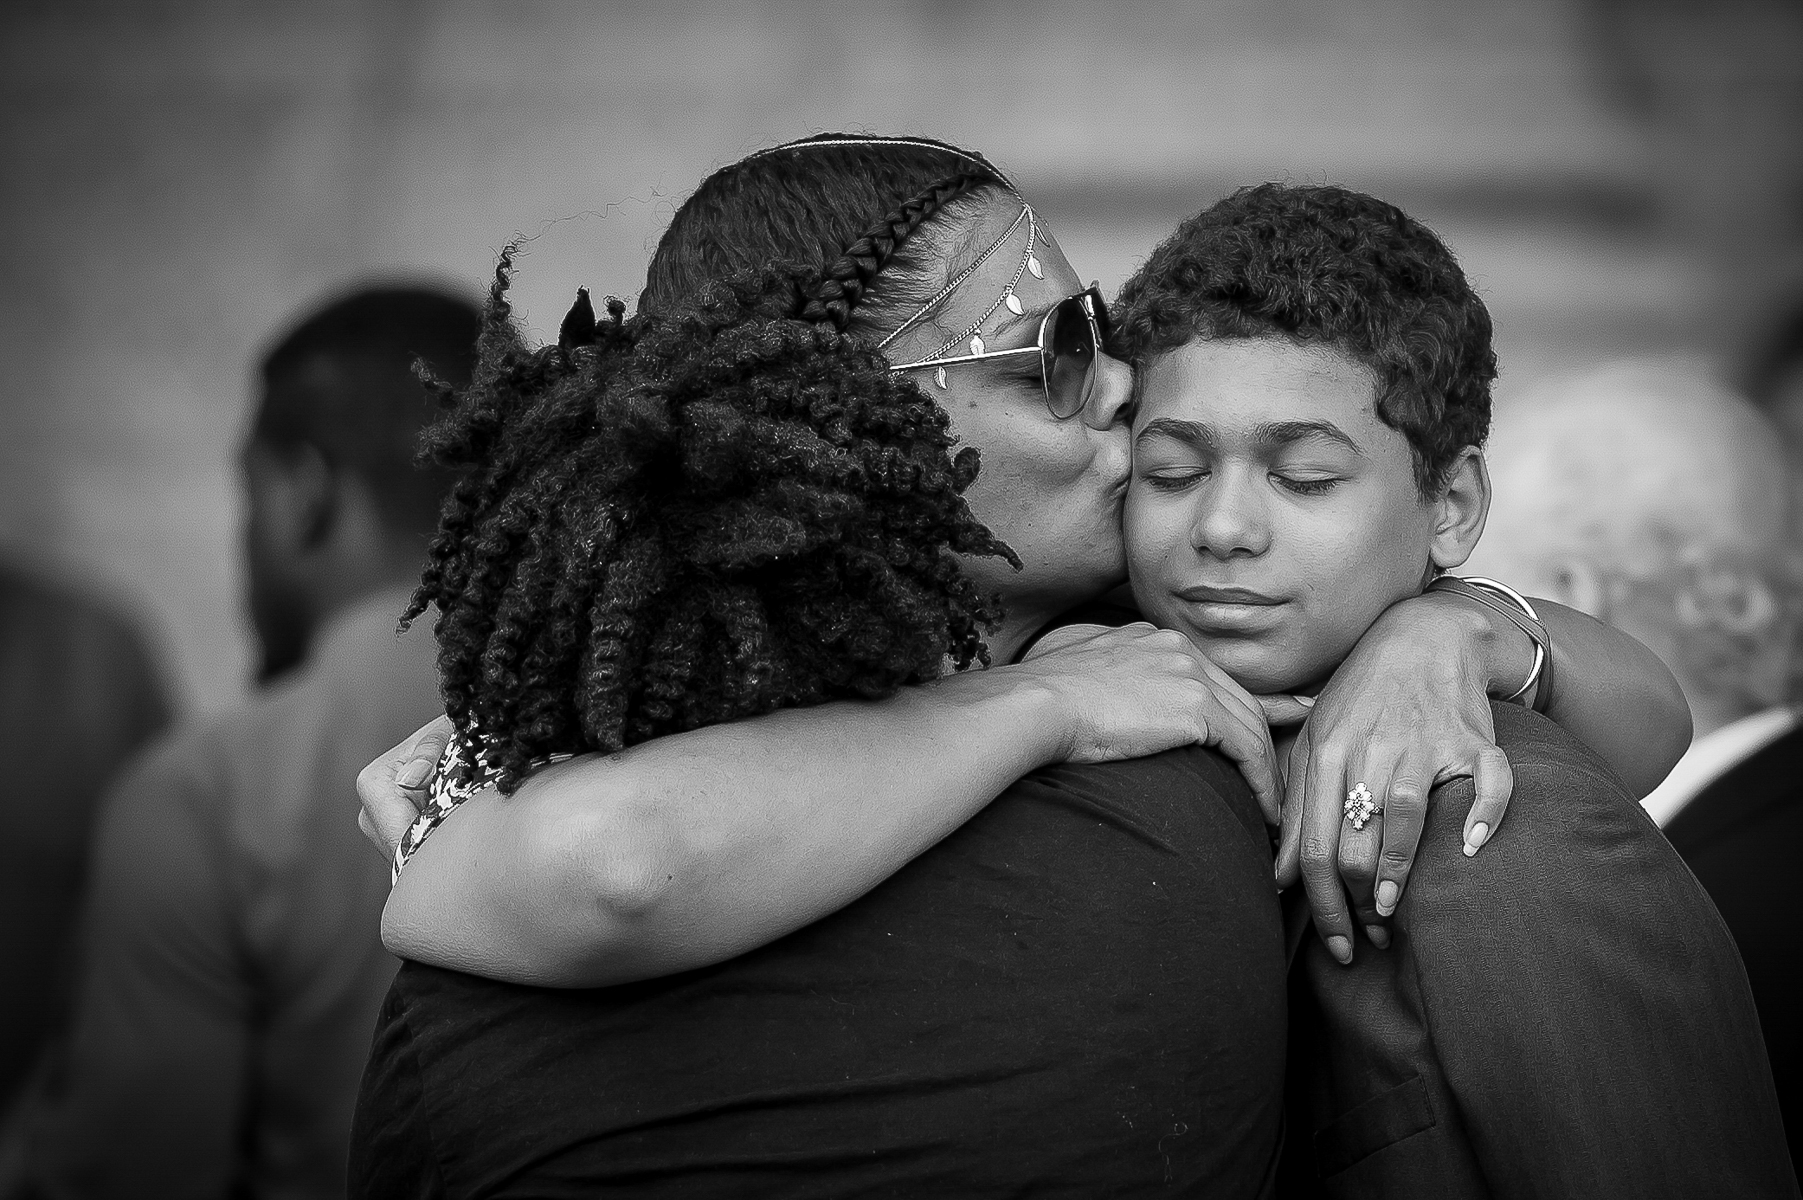 Mourners comforted each other outside the St. Paul Cathedral on July 14, 2016 in St. Paul, MN.